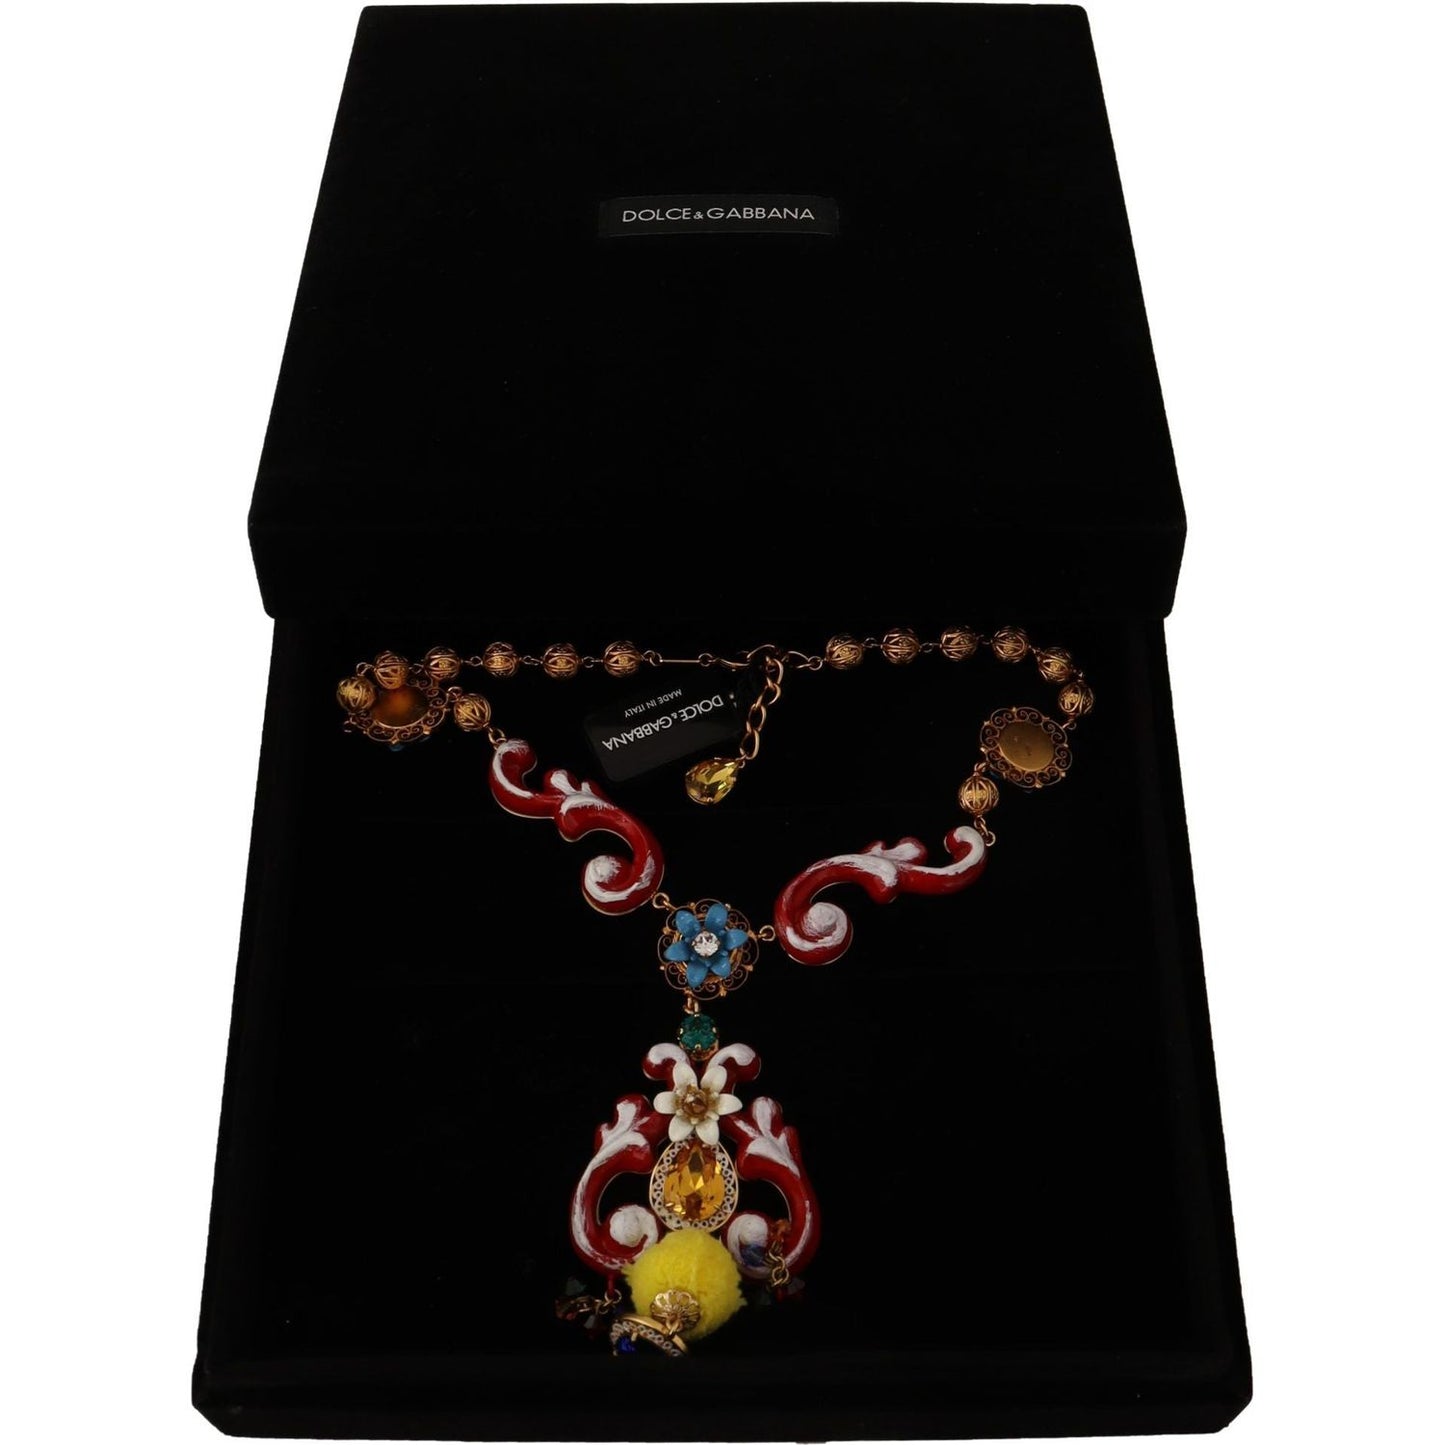 Dolce & Gabbana Multicolor Crystal Statement Necklace gold-brass-carretto-sicily-statement-crystal-chain-necklace WOMAN NECKLACE IMG_8468-scaled-67bbb832-958_672f1200-00c1-4d5b-abac-0004ce466d0e.jpg